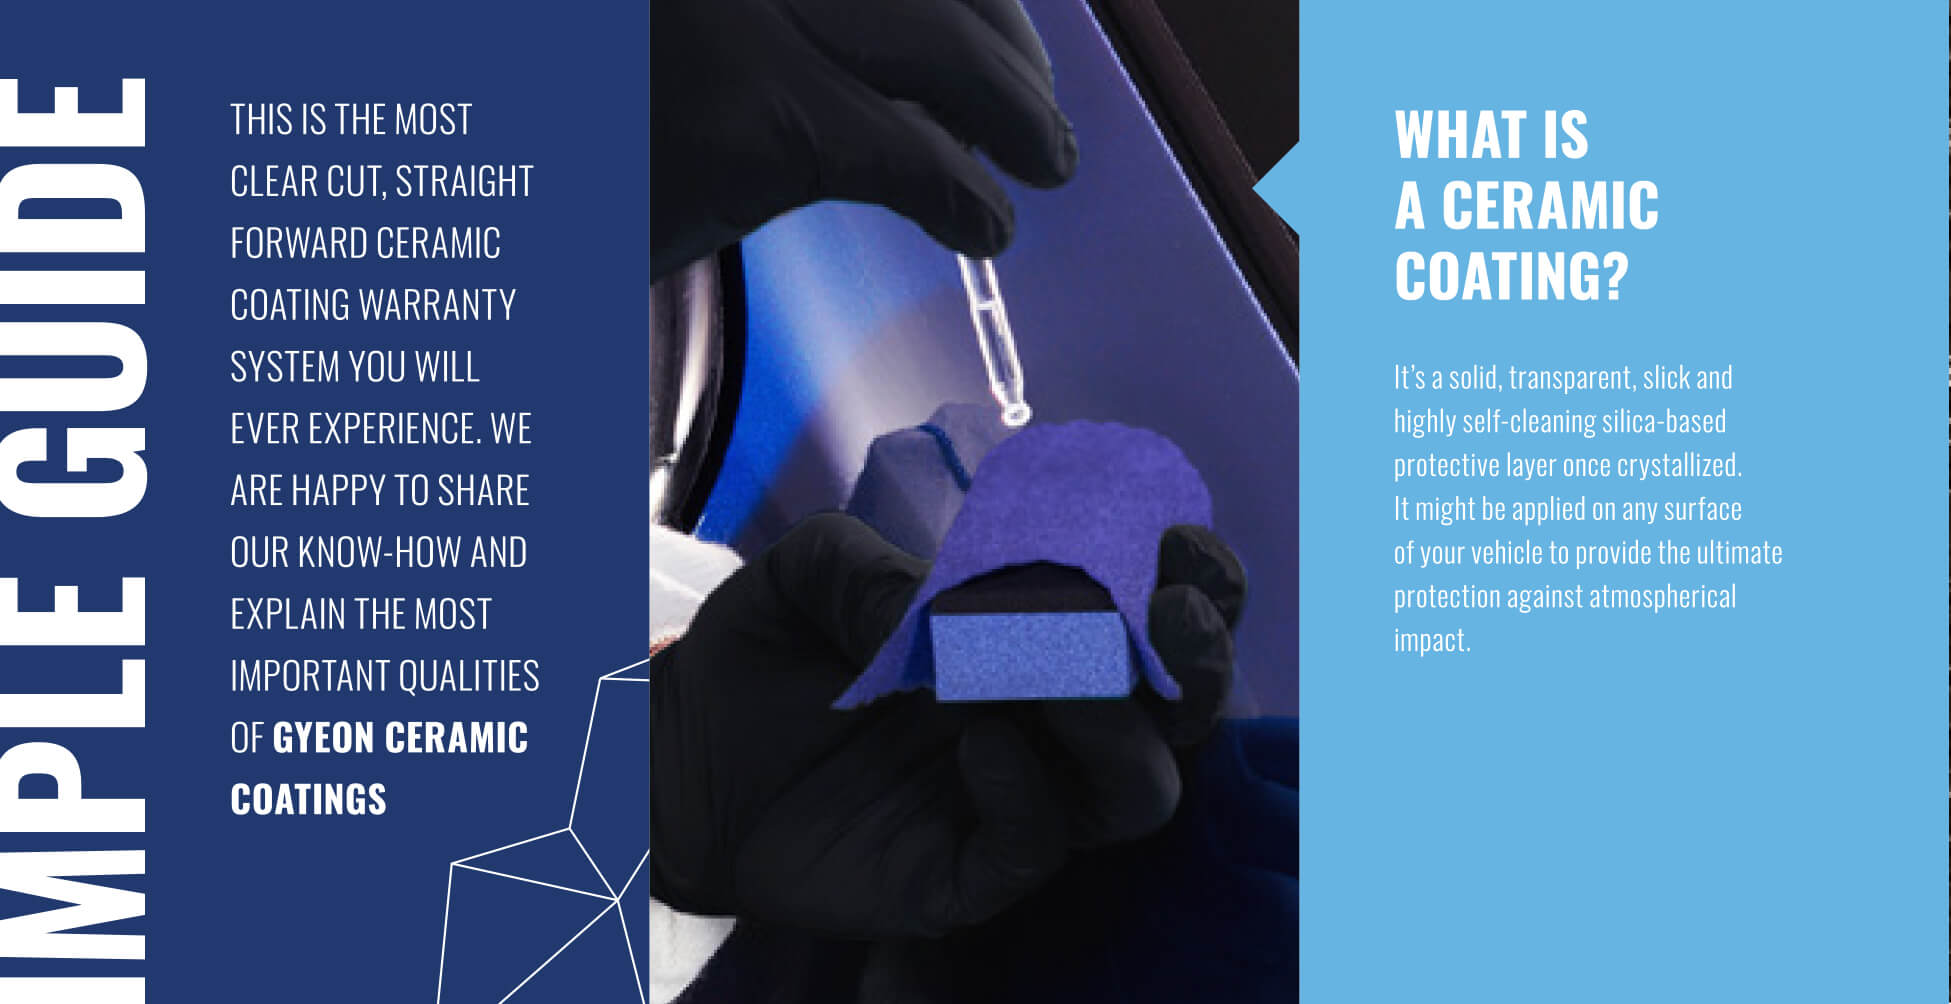 Simple guide to ceramic coatings: this is the most clear cut, straight forward ceramic coating warranty system you will ever experience.  What is a ceramic coating? It's a solid, transparent, slick and highly self-cleaning hydrophobic silica layer.